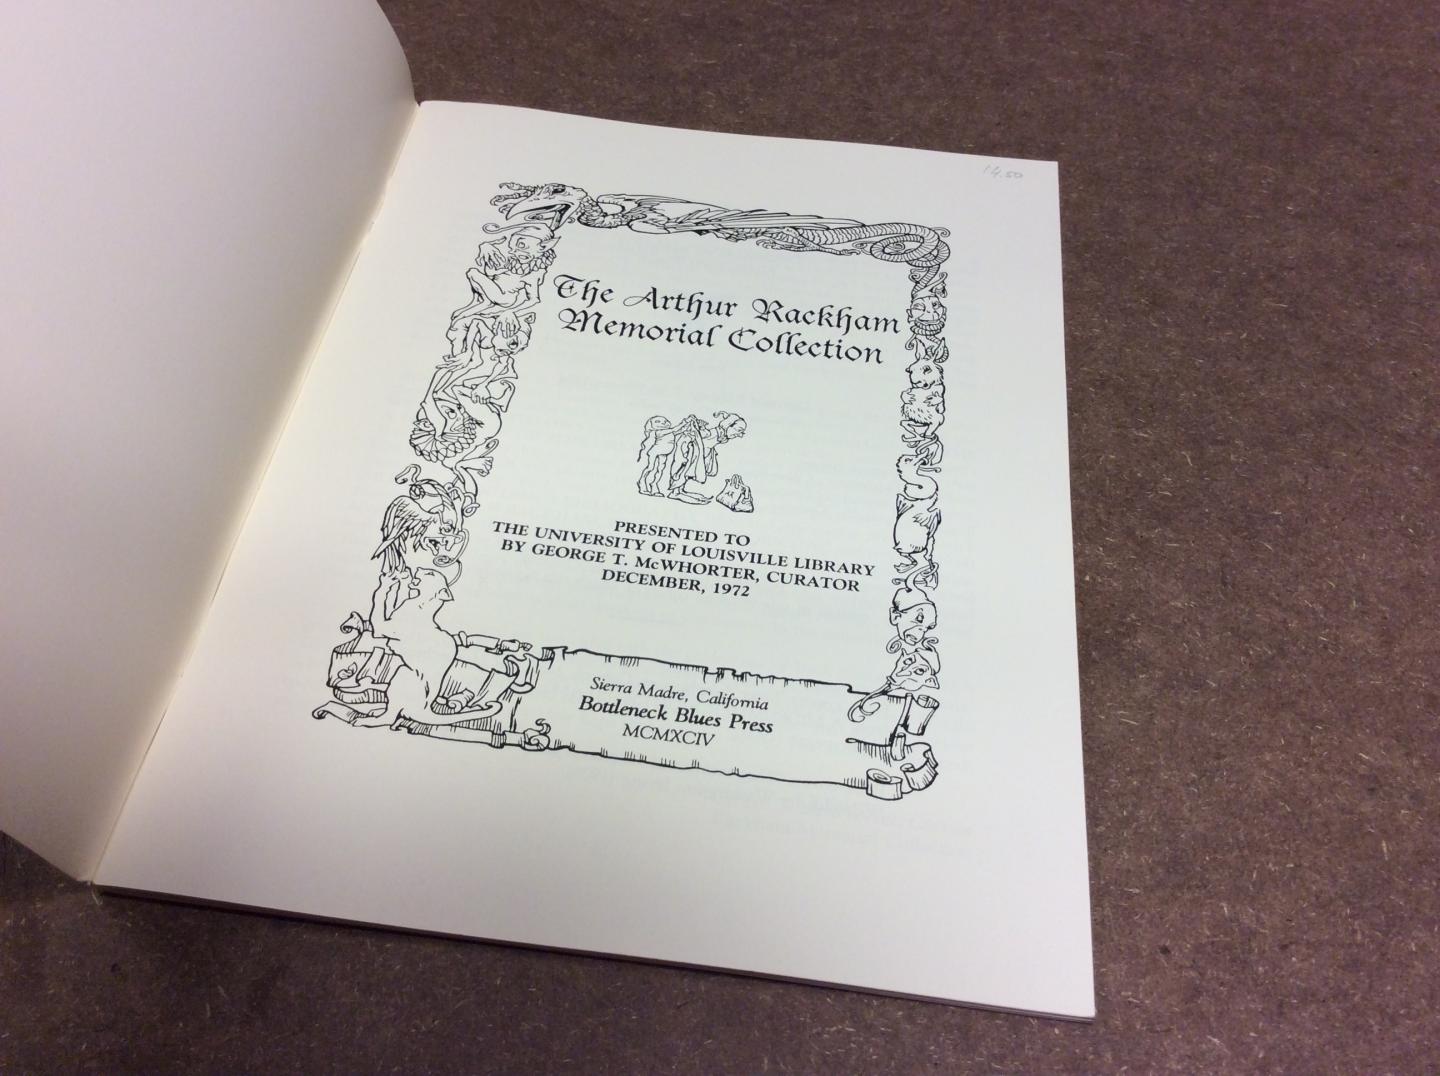 N.N. - The Arthur Rackham Memorial Collection: Presented to the University of Louisville Library by George T. McWhorter, Curator, December, 1972